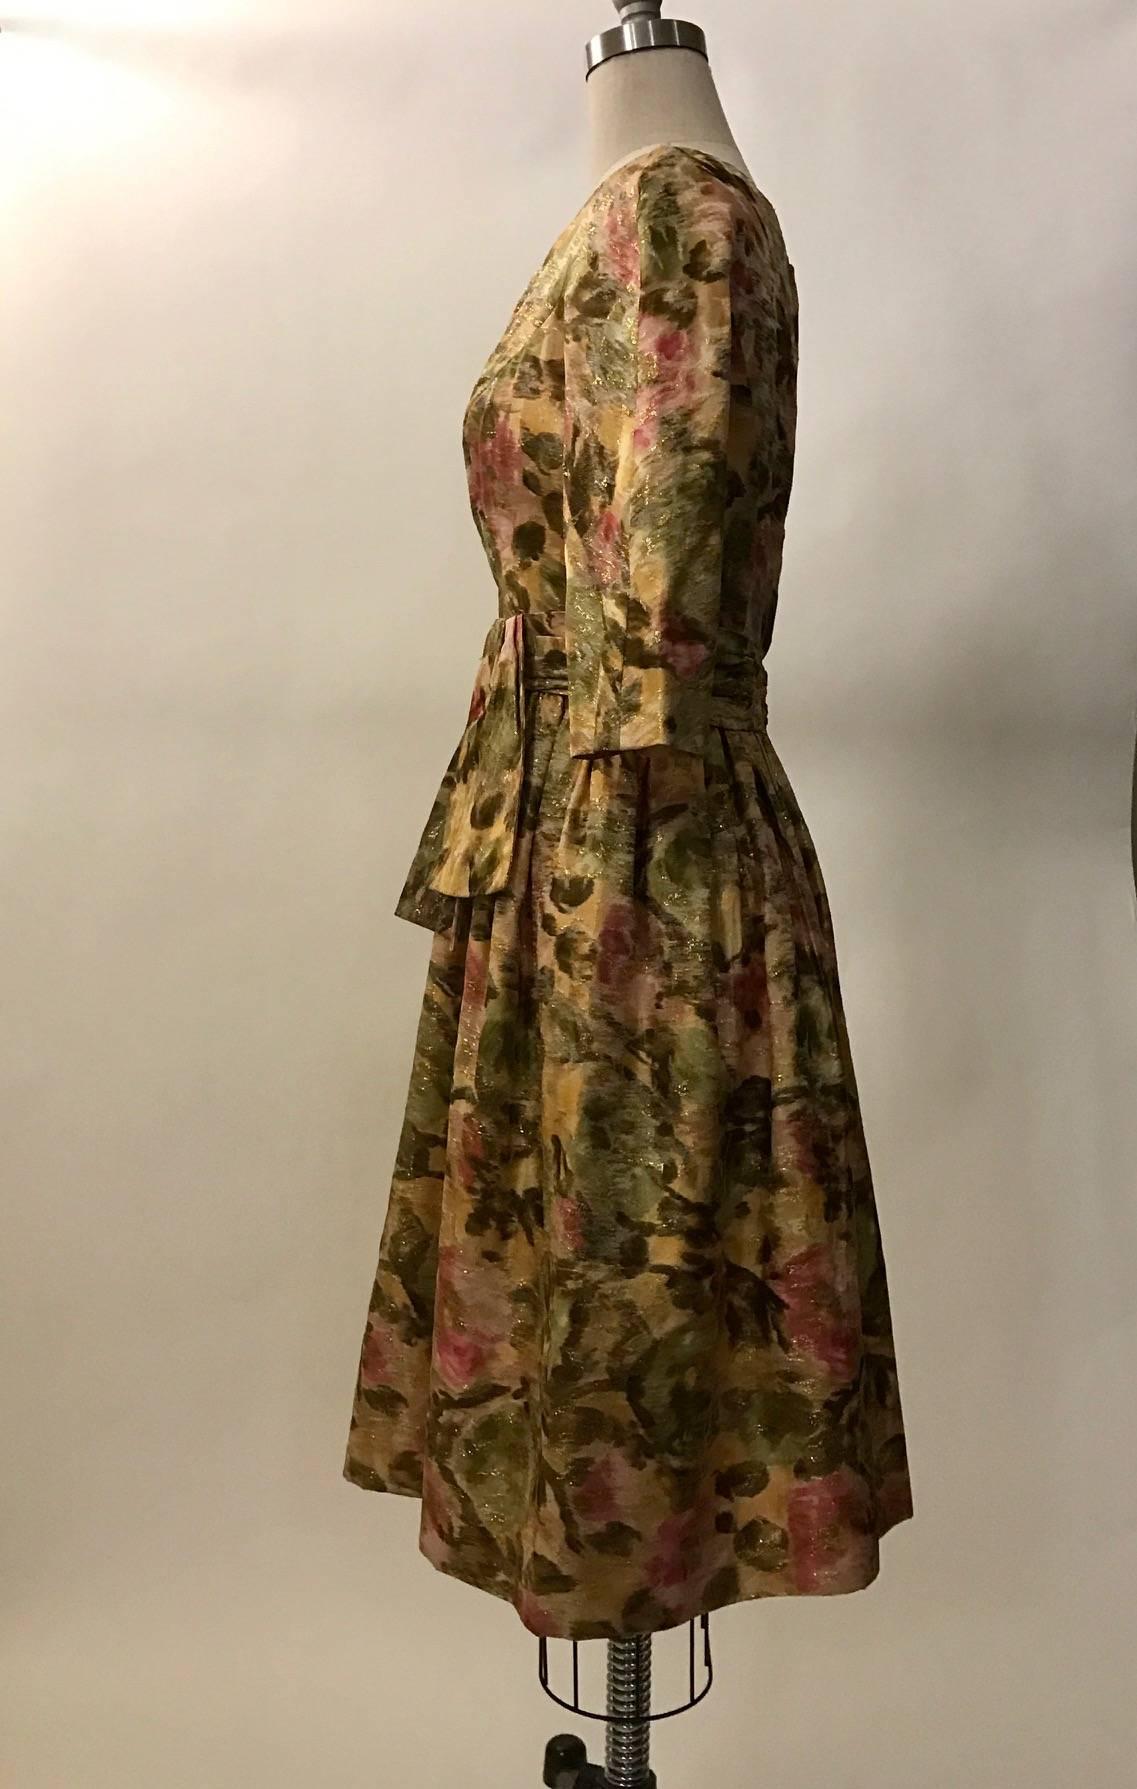 Wilson Folmar for Edward Abbott late 1950's metallic cream, pink, green, and gold floral print dress. Boat neck and bow detail at waist. Mid length sleeves. Back zip with hook and eyes at top zip and waist detail.

Perfect for a tea or garden